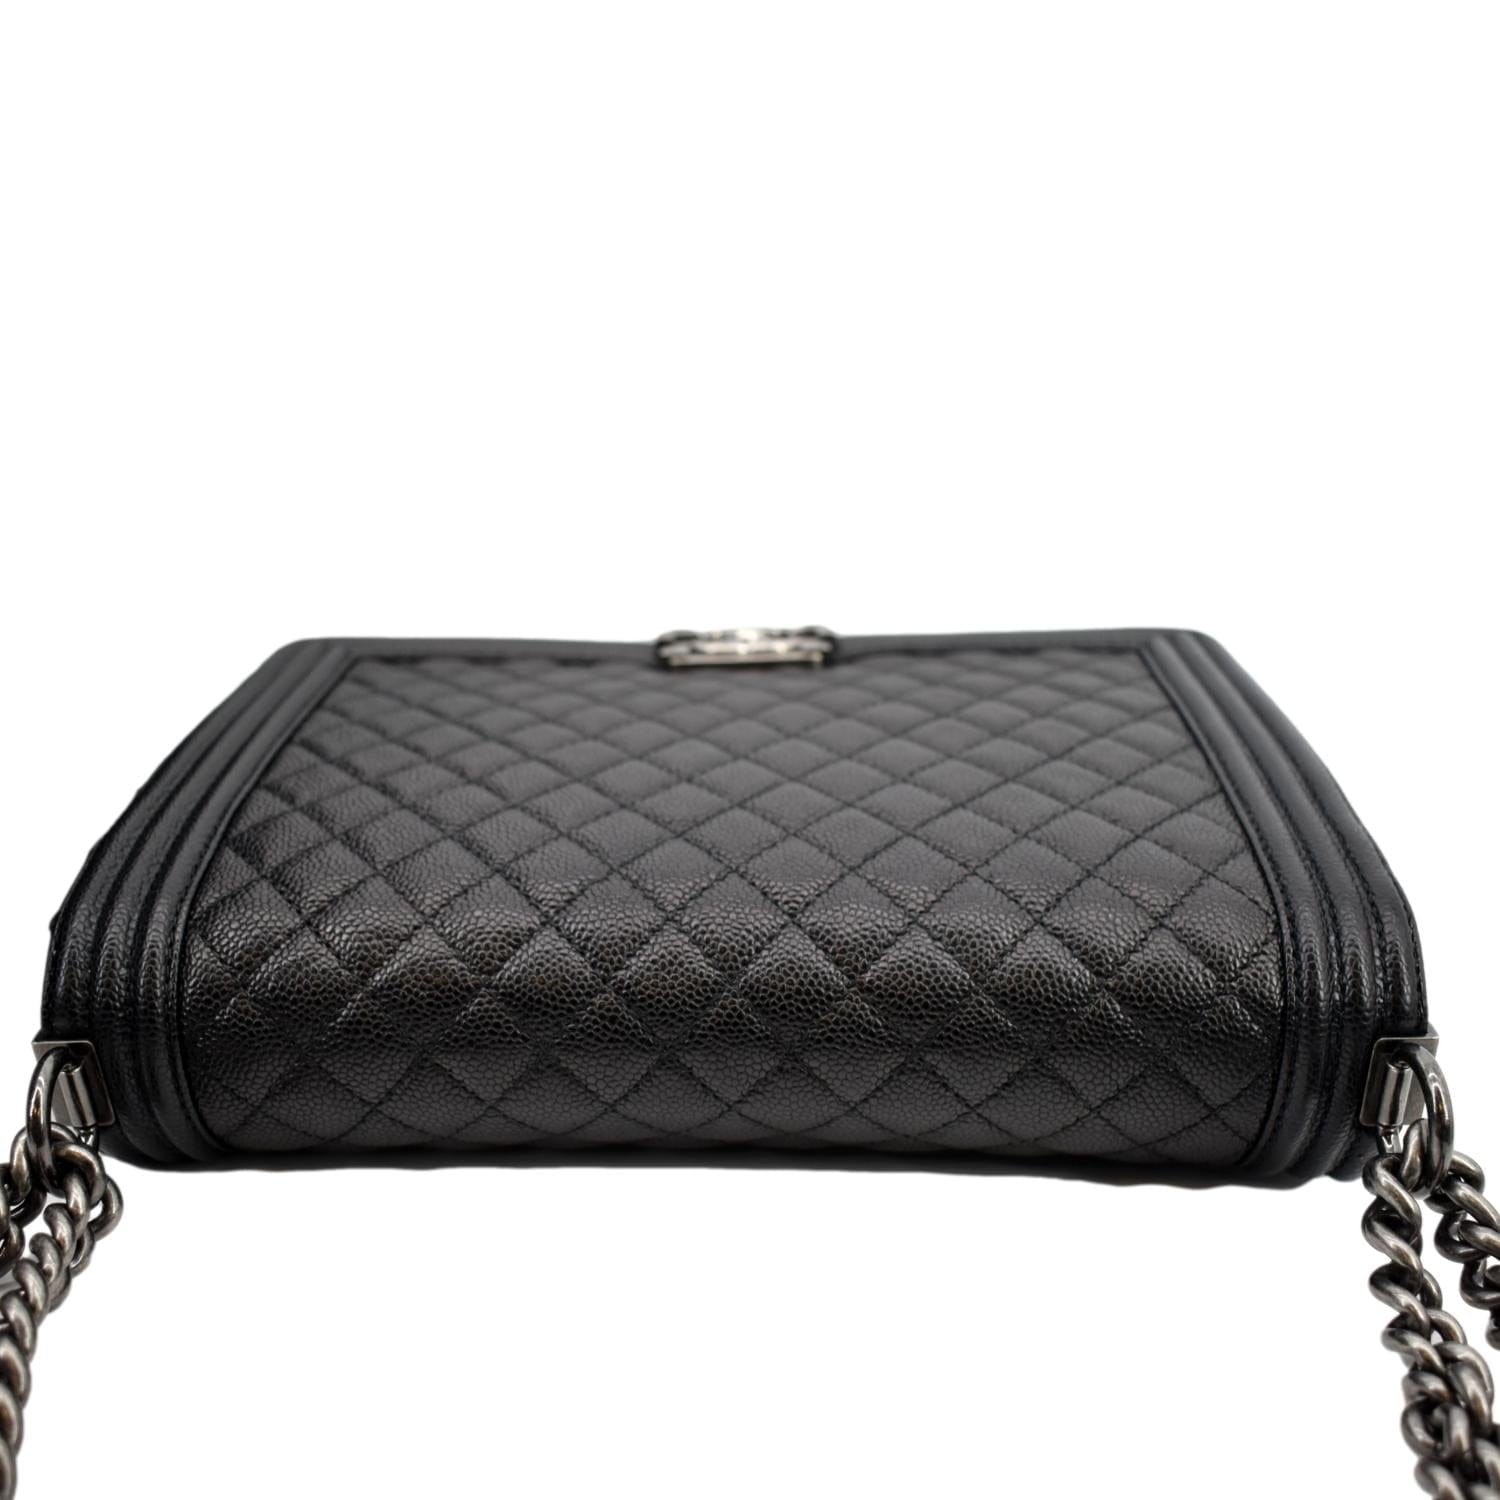 Chanel Women Large Flap Bag with Top Handle in Grained Calfskin Leather- Black - LULUX